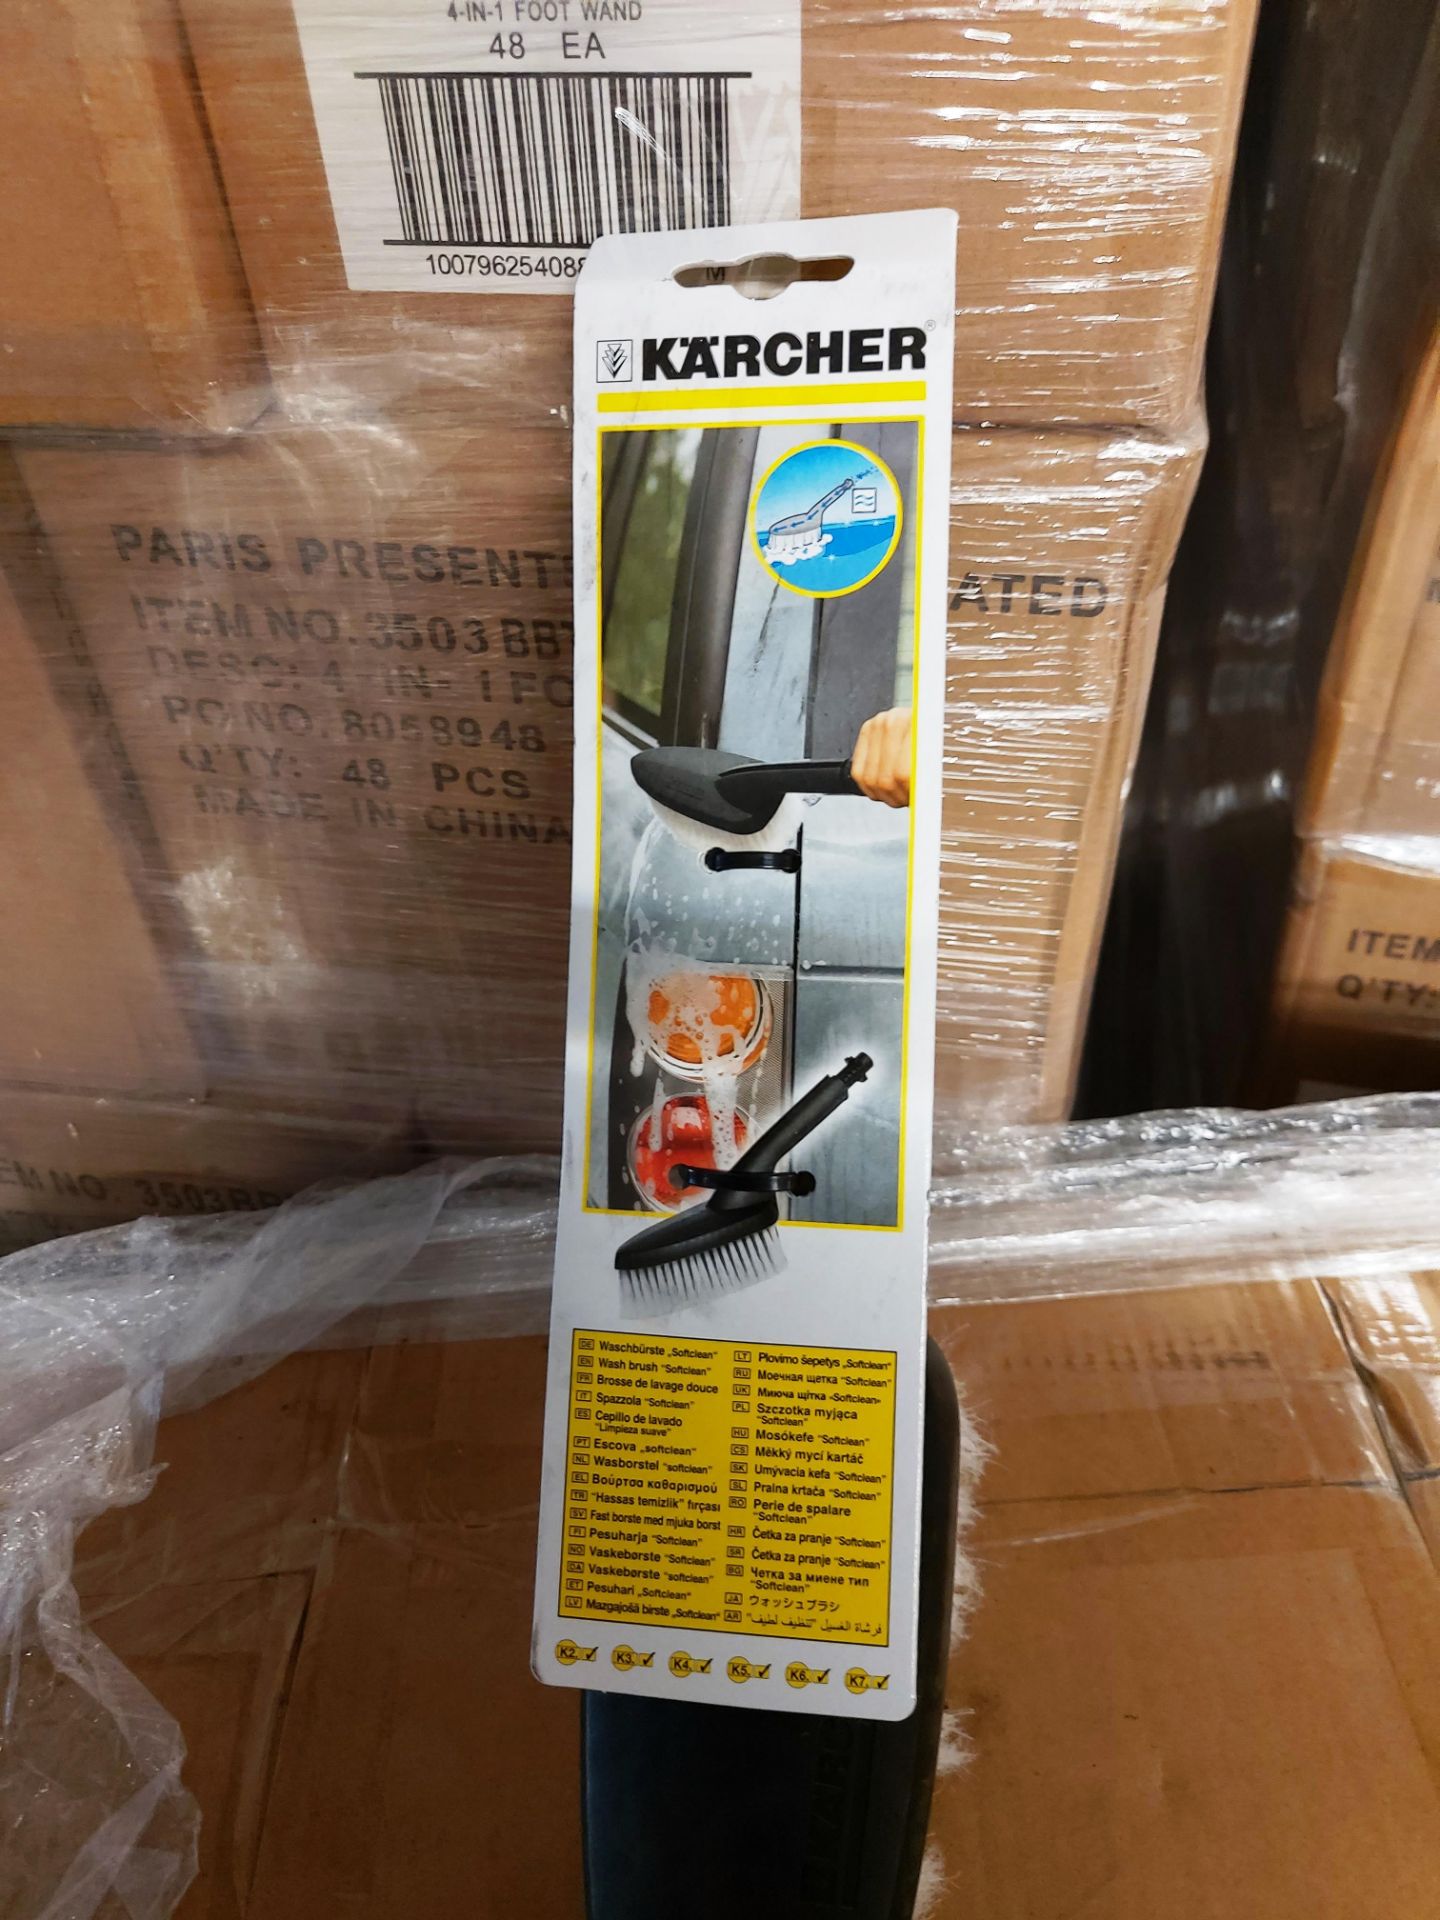 50 x Karcher car cleaning brushes brand new in original packaging rrp - £9.99. - Image 2 of 2